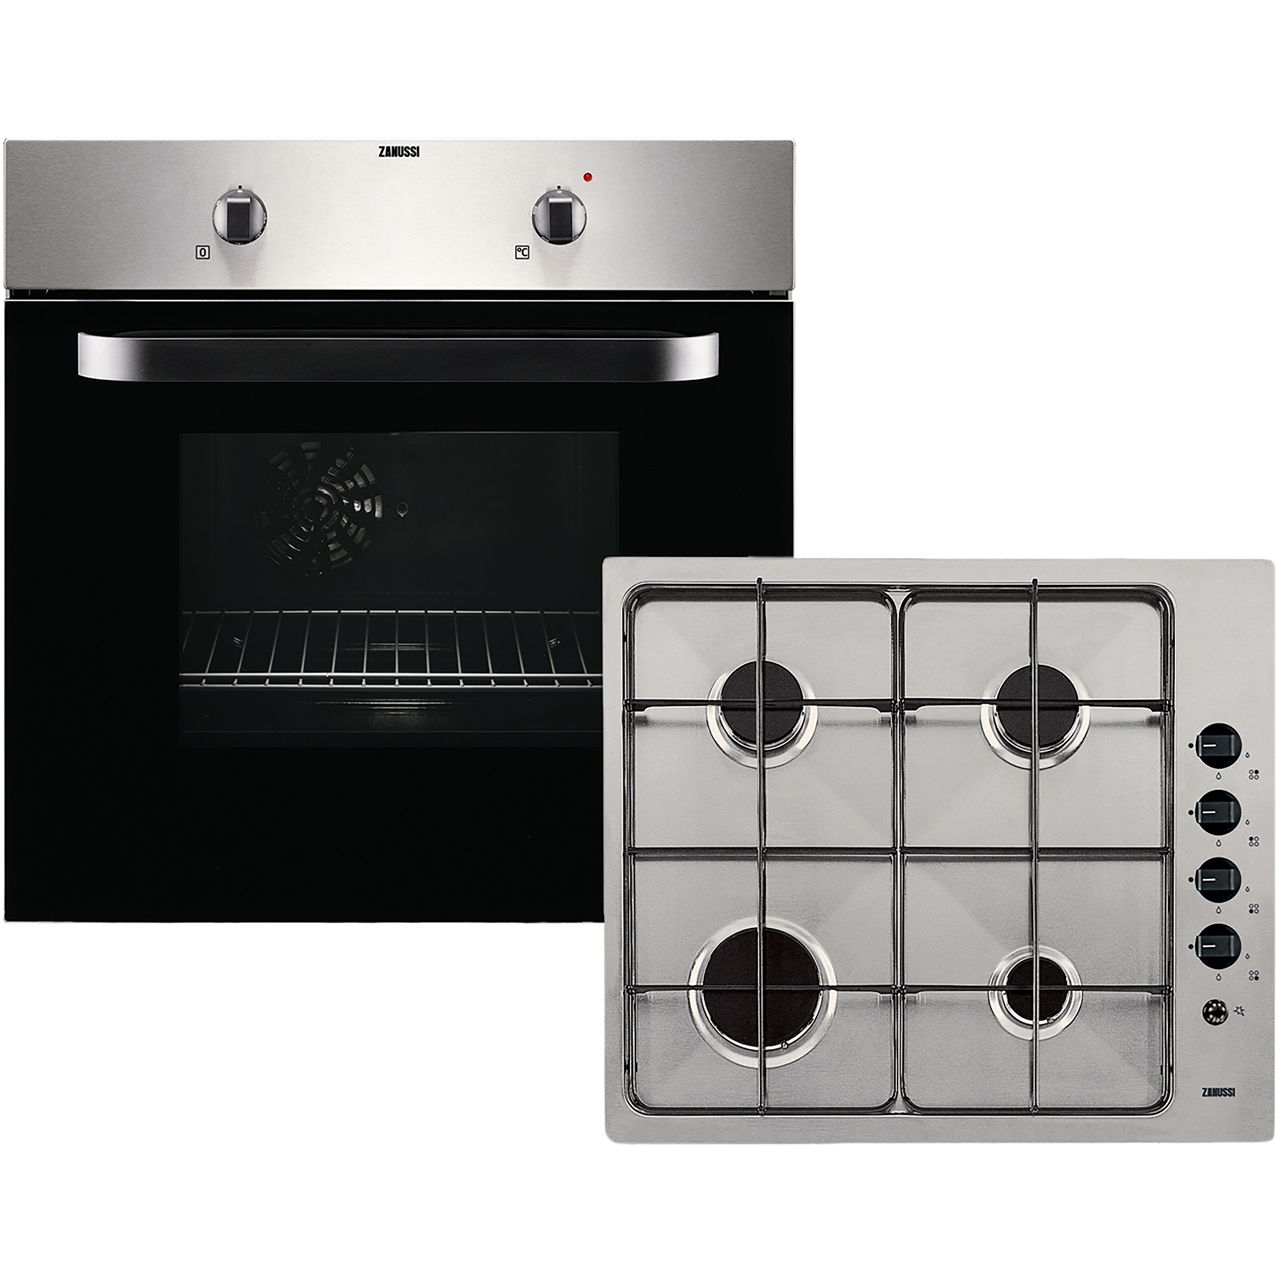 Zanussi ZPGF4030X Built In Electric Single Oven and Gas Hob Pack Review